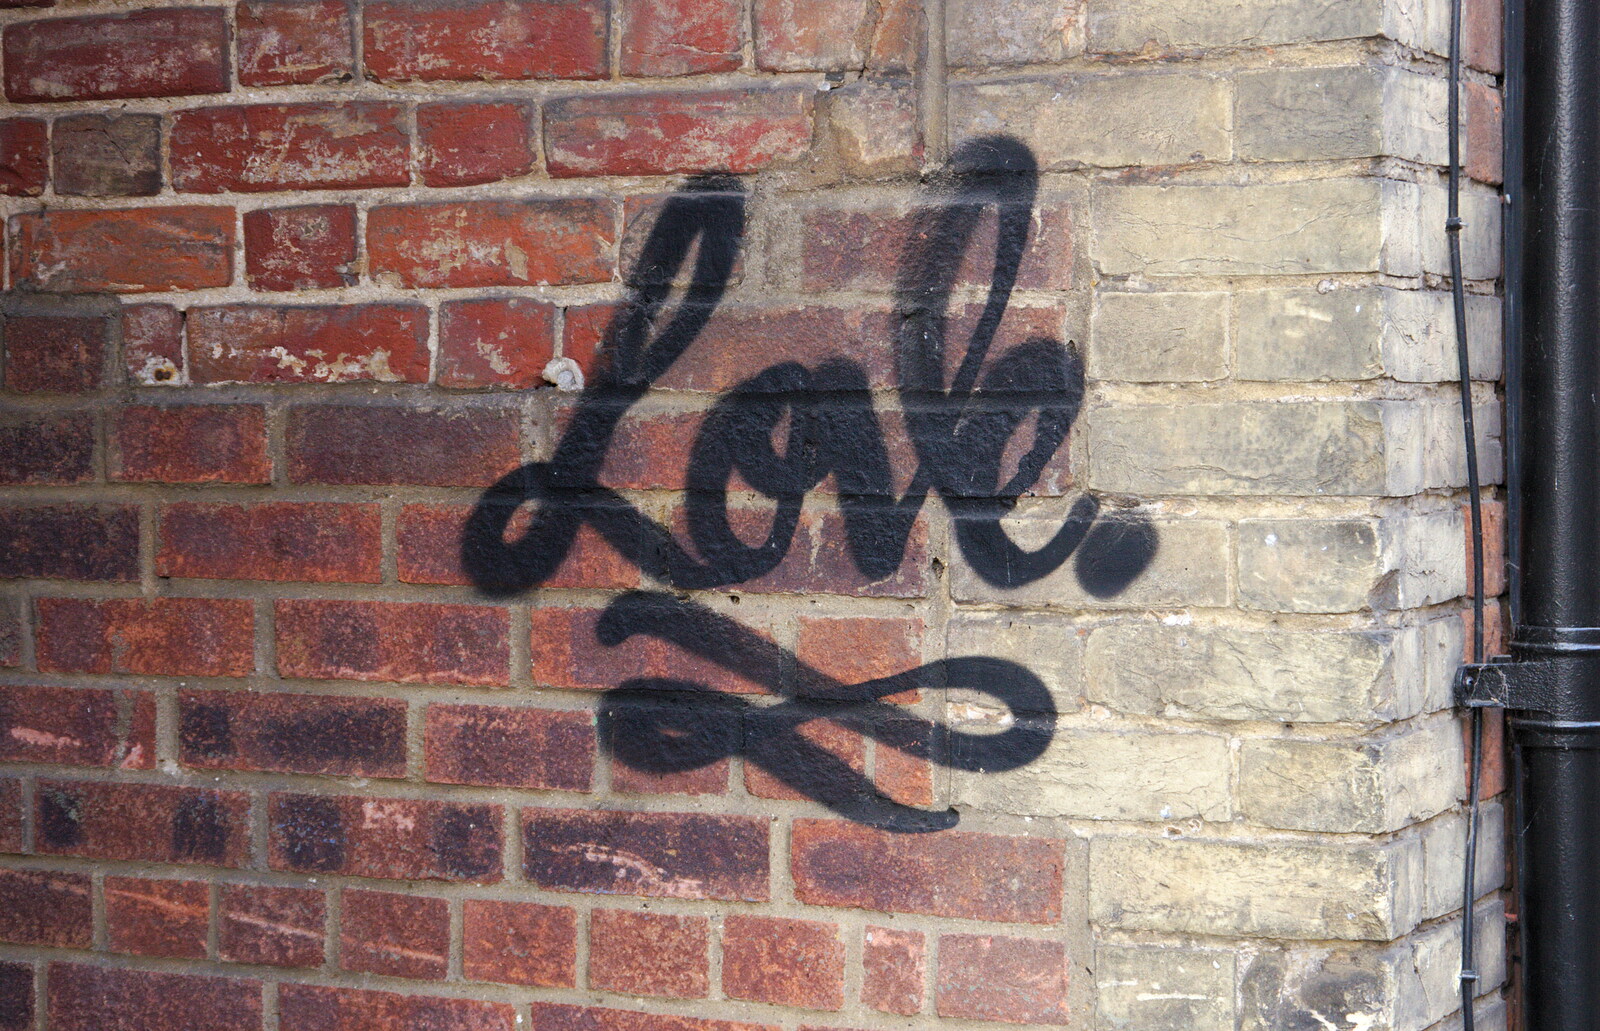 A bit of graffiti love from Singing in John Lewis, Norwich, Norfolk - 13th April 2019